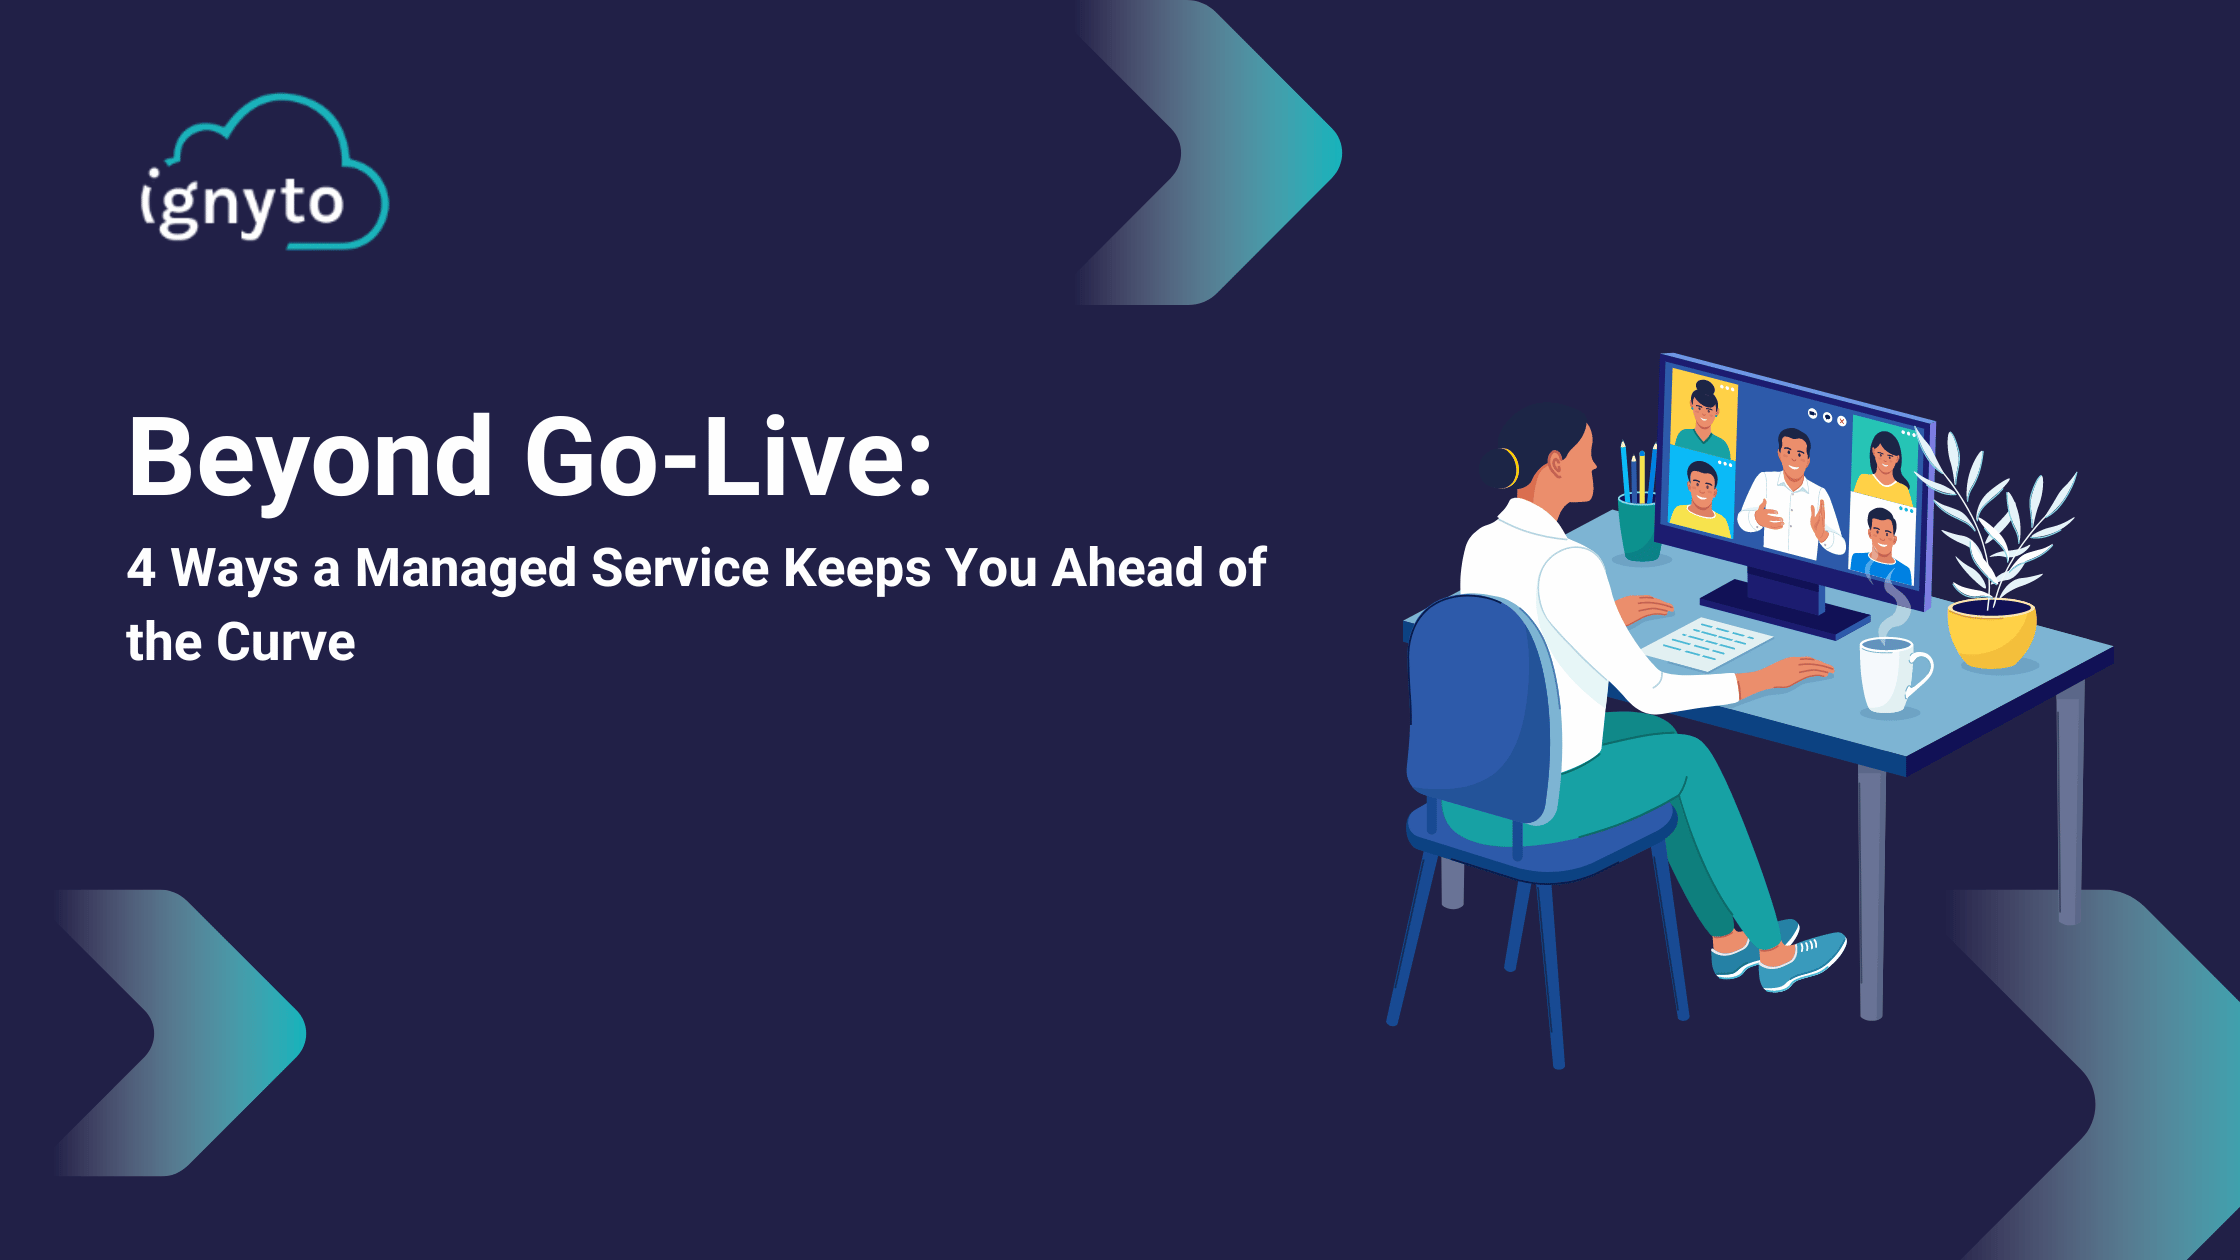 Beyond Go live with Ignyto Managed Service